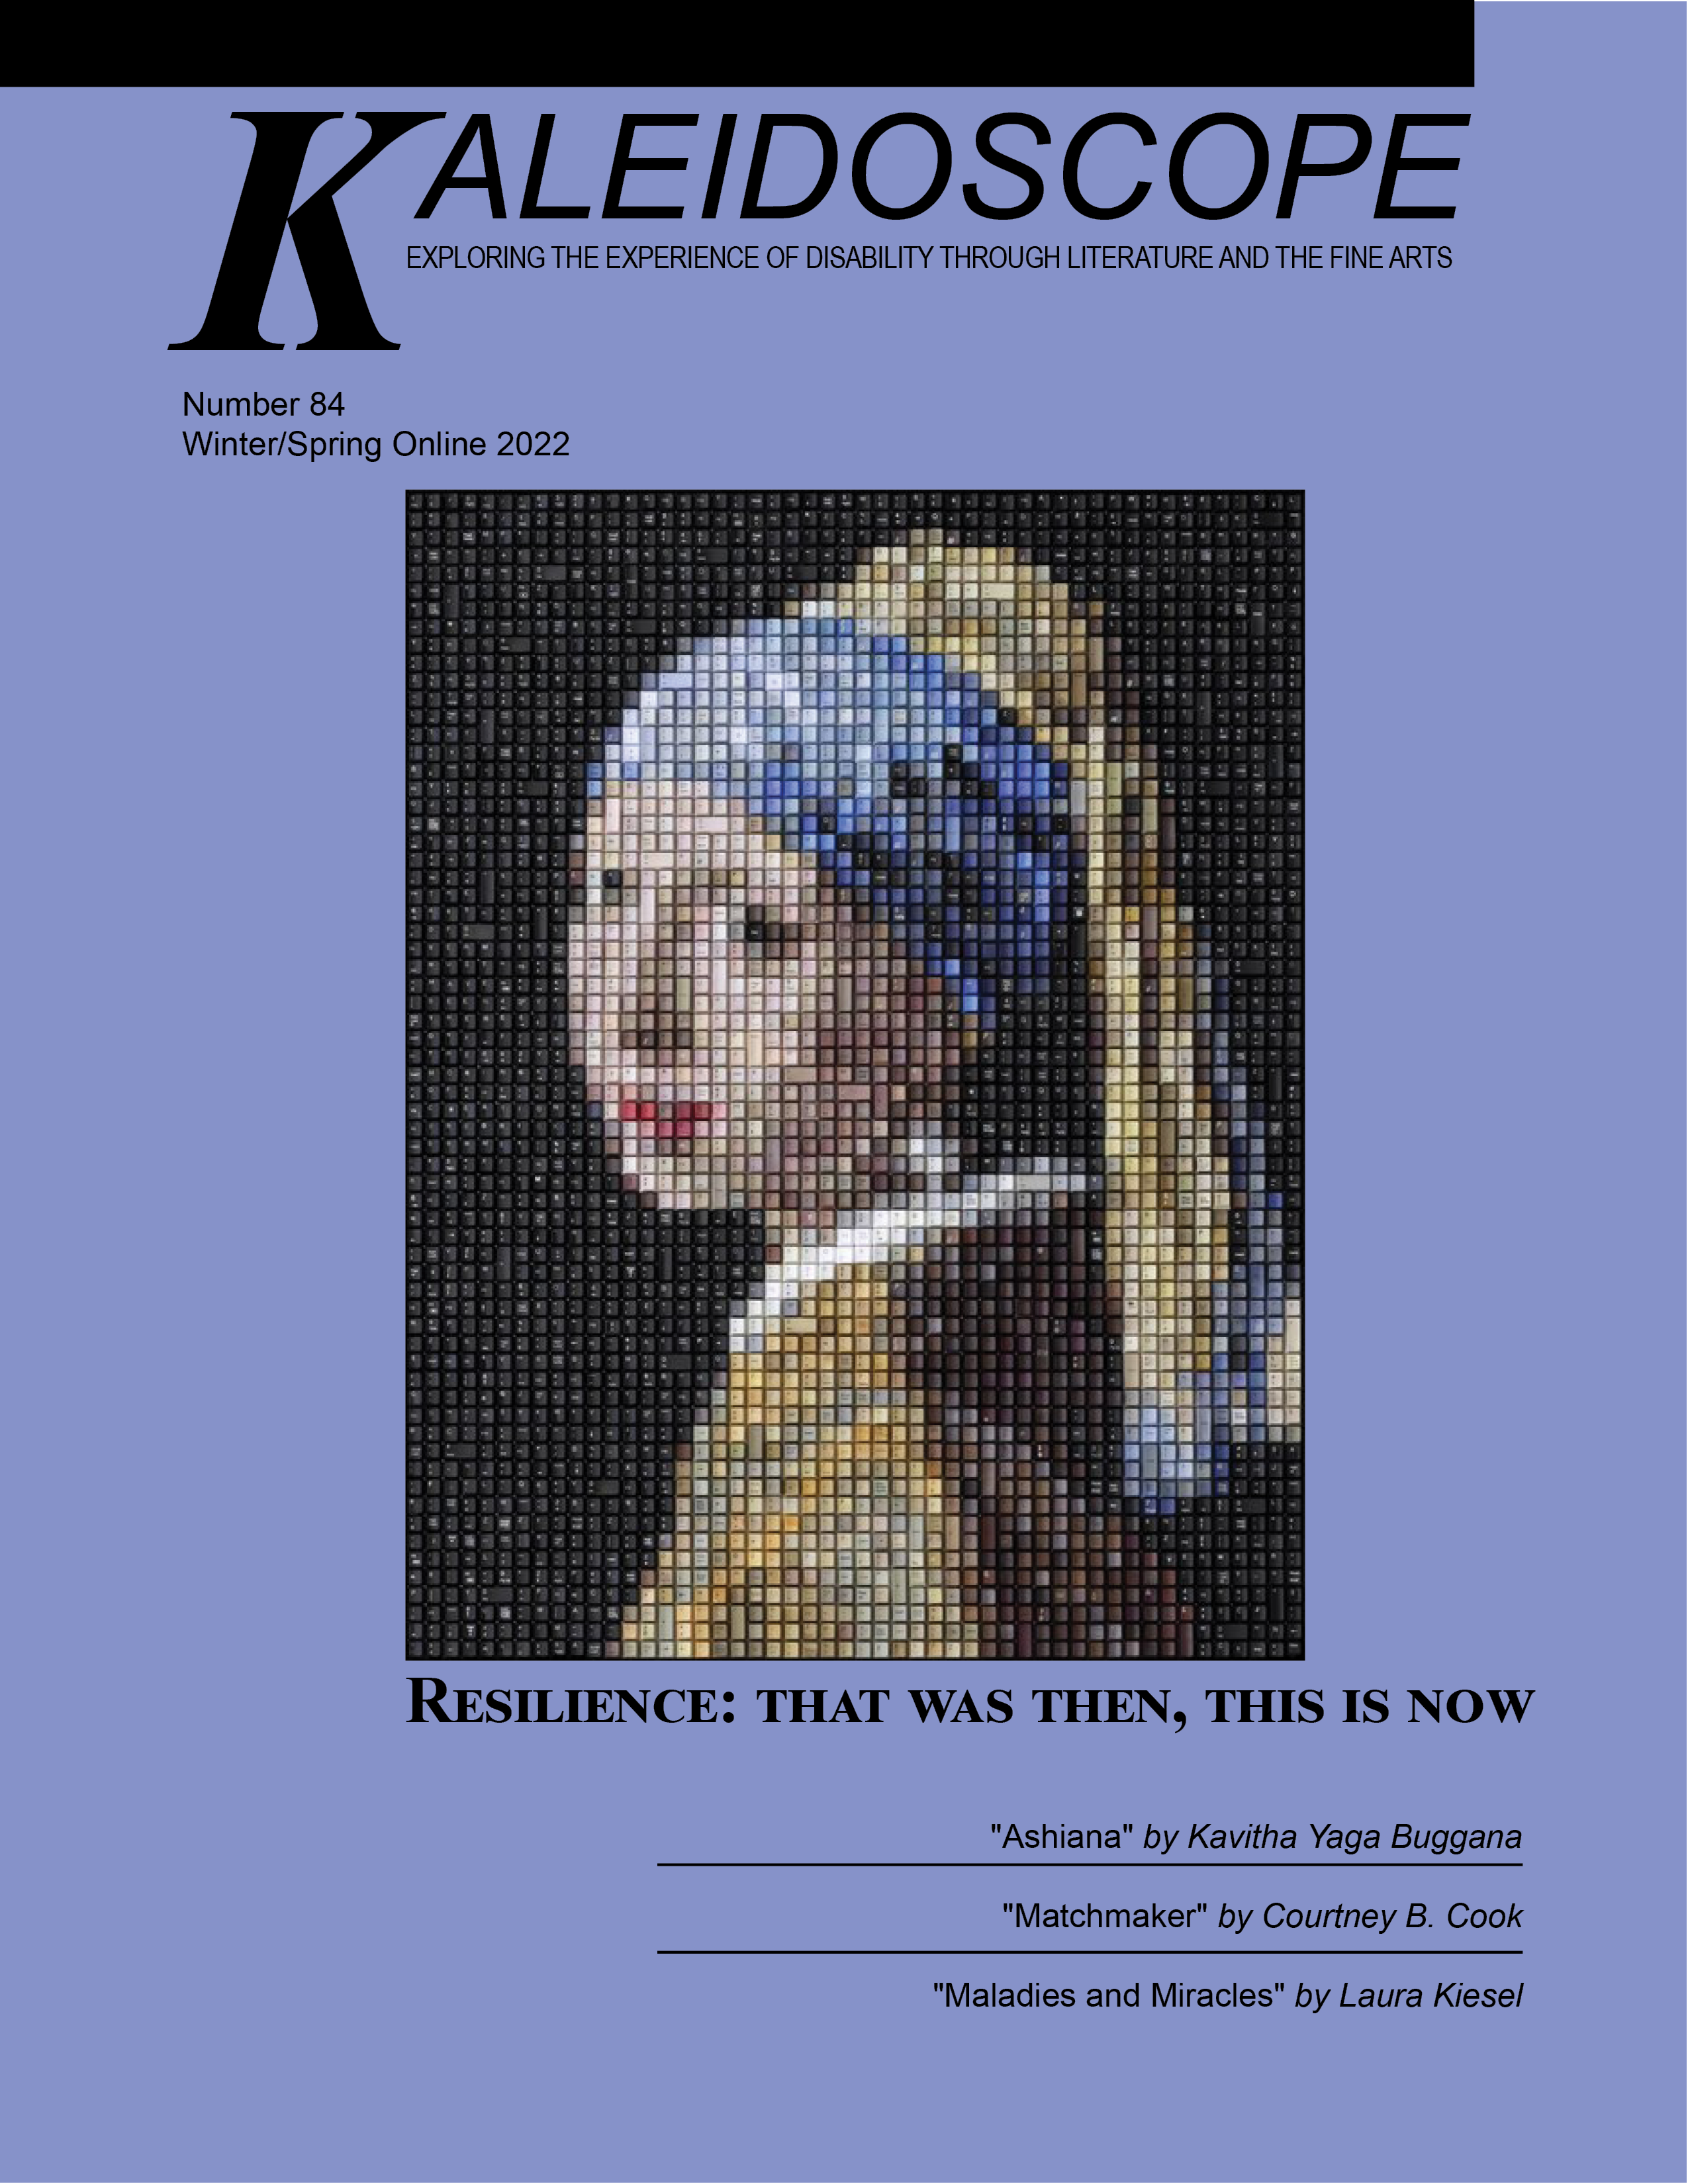 The cover of issue 84 of Kaleidoscope. It featured a recreation of "Girl with a Pearl Earring" by Erik Jensen.